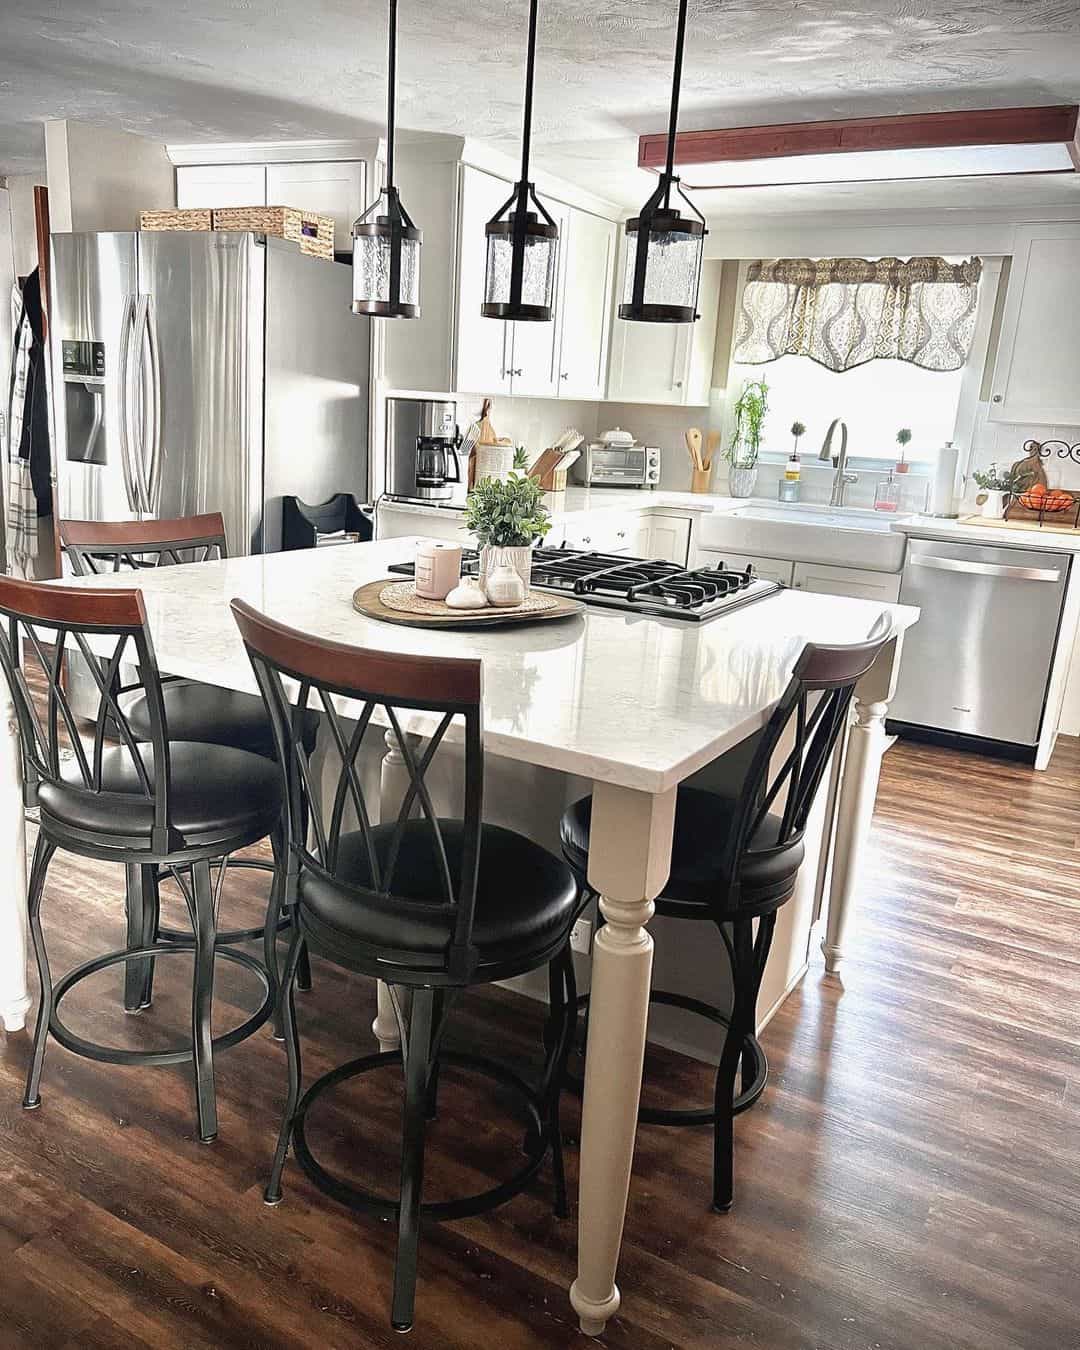 Endearing Seating: Kitchen Island Finale